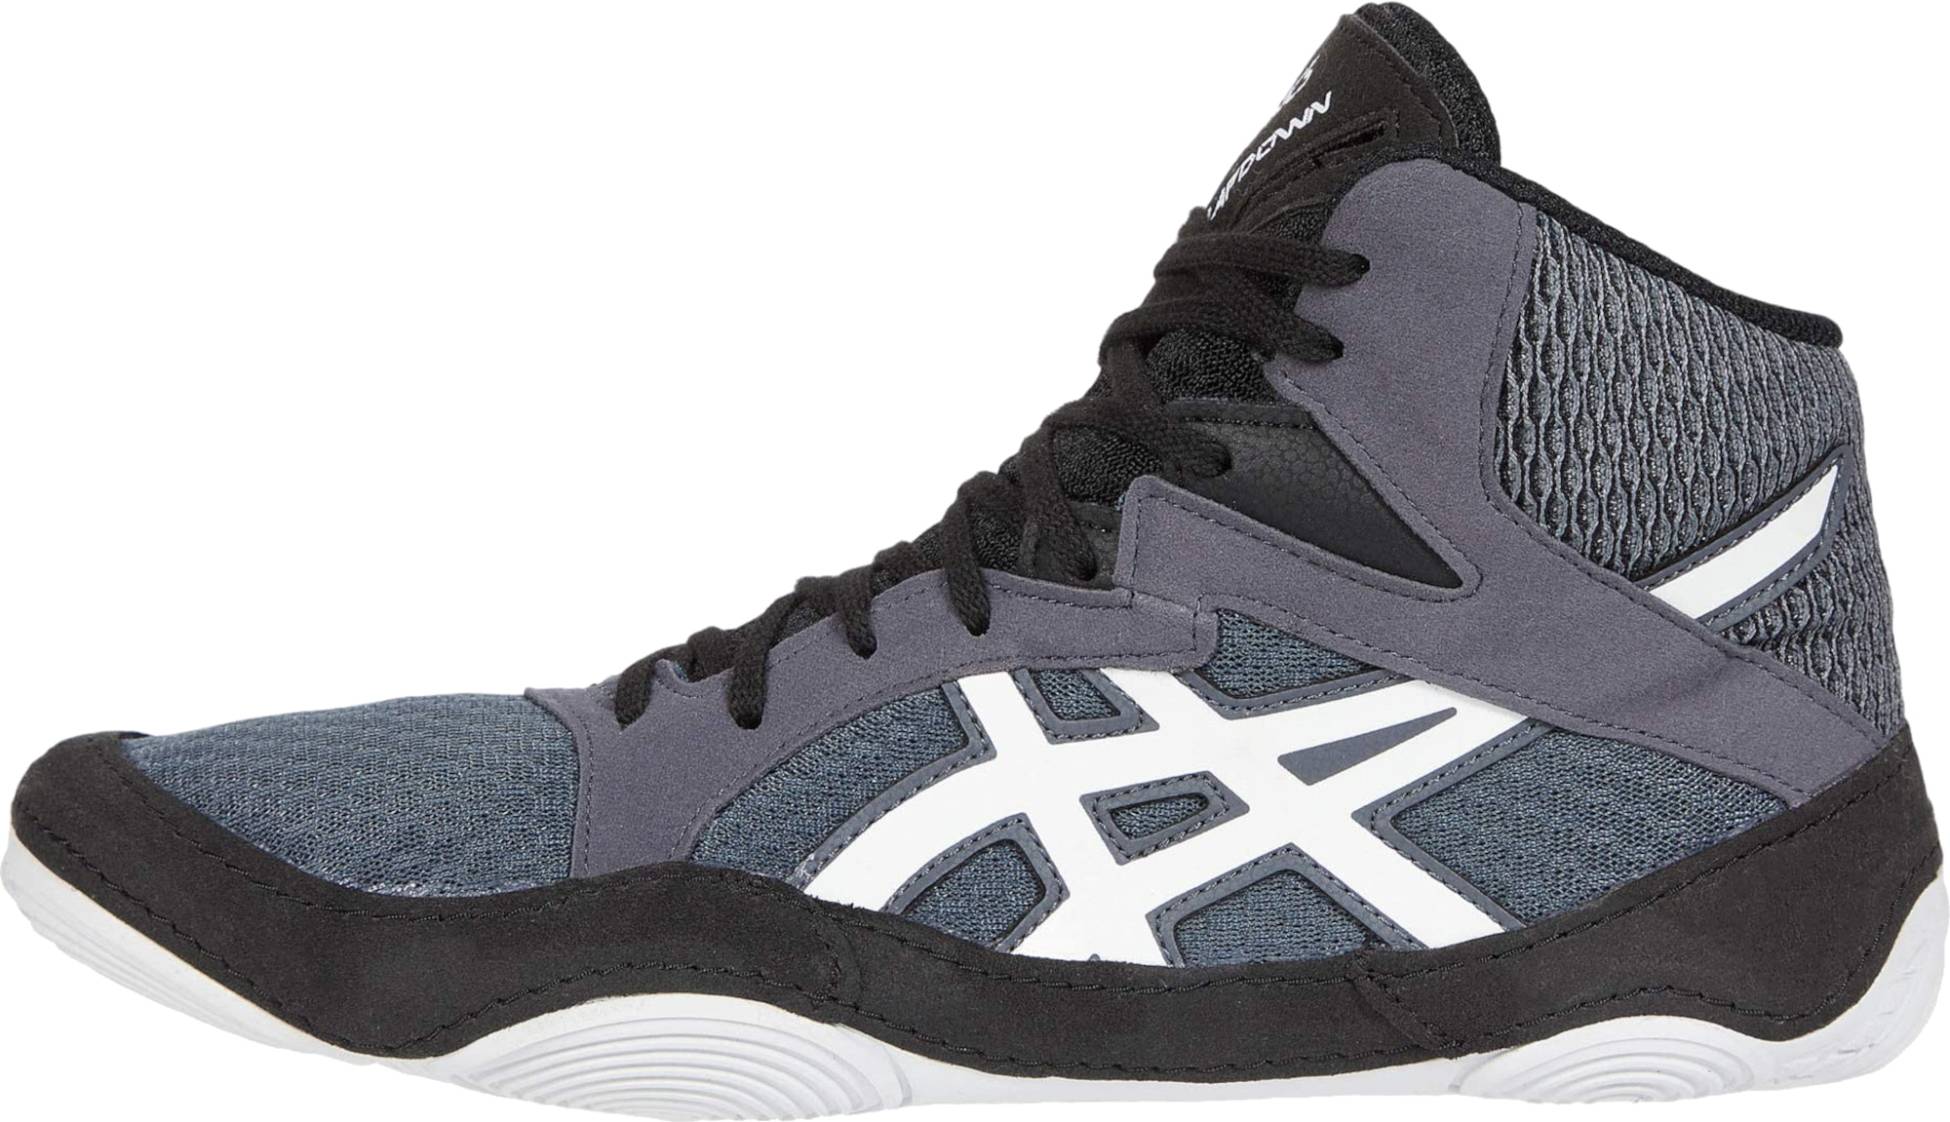 Only $49 + Review of Asics Snapdown 3 